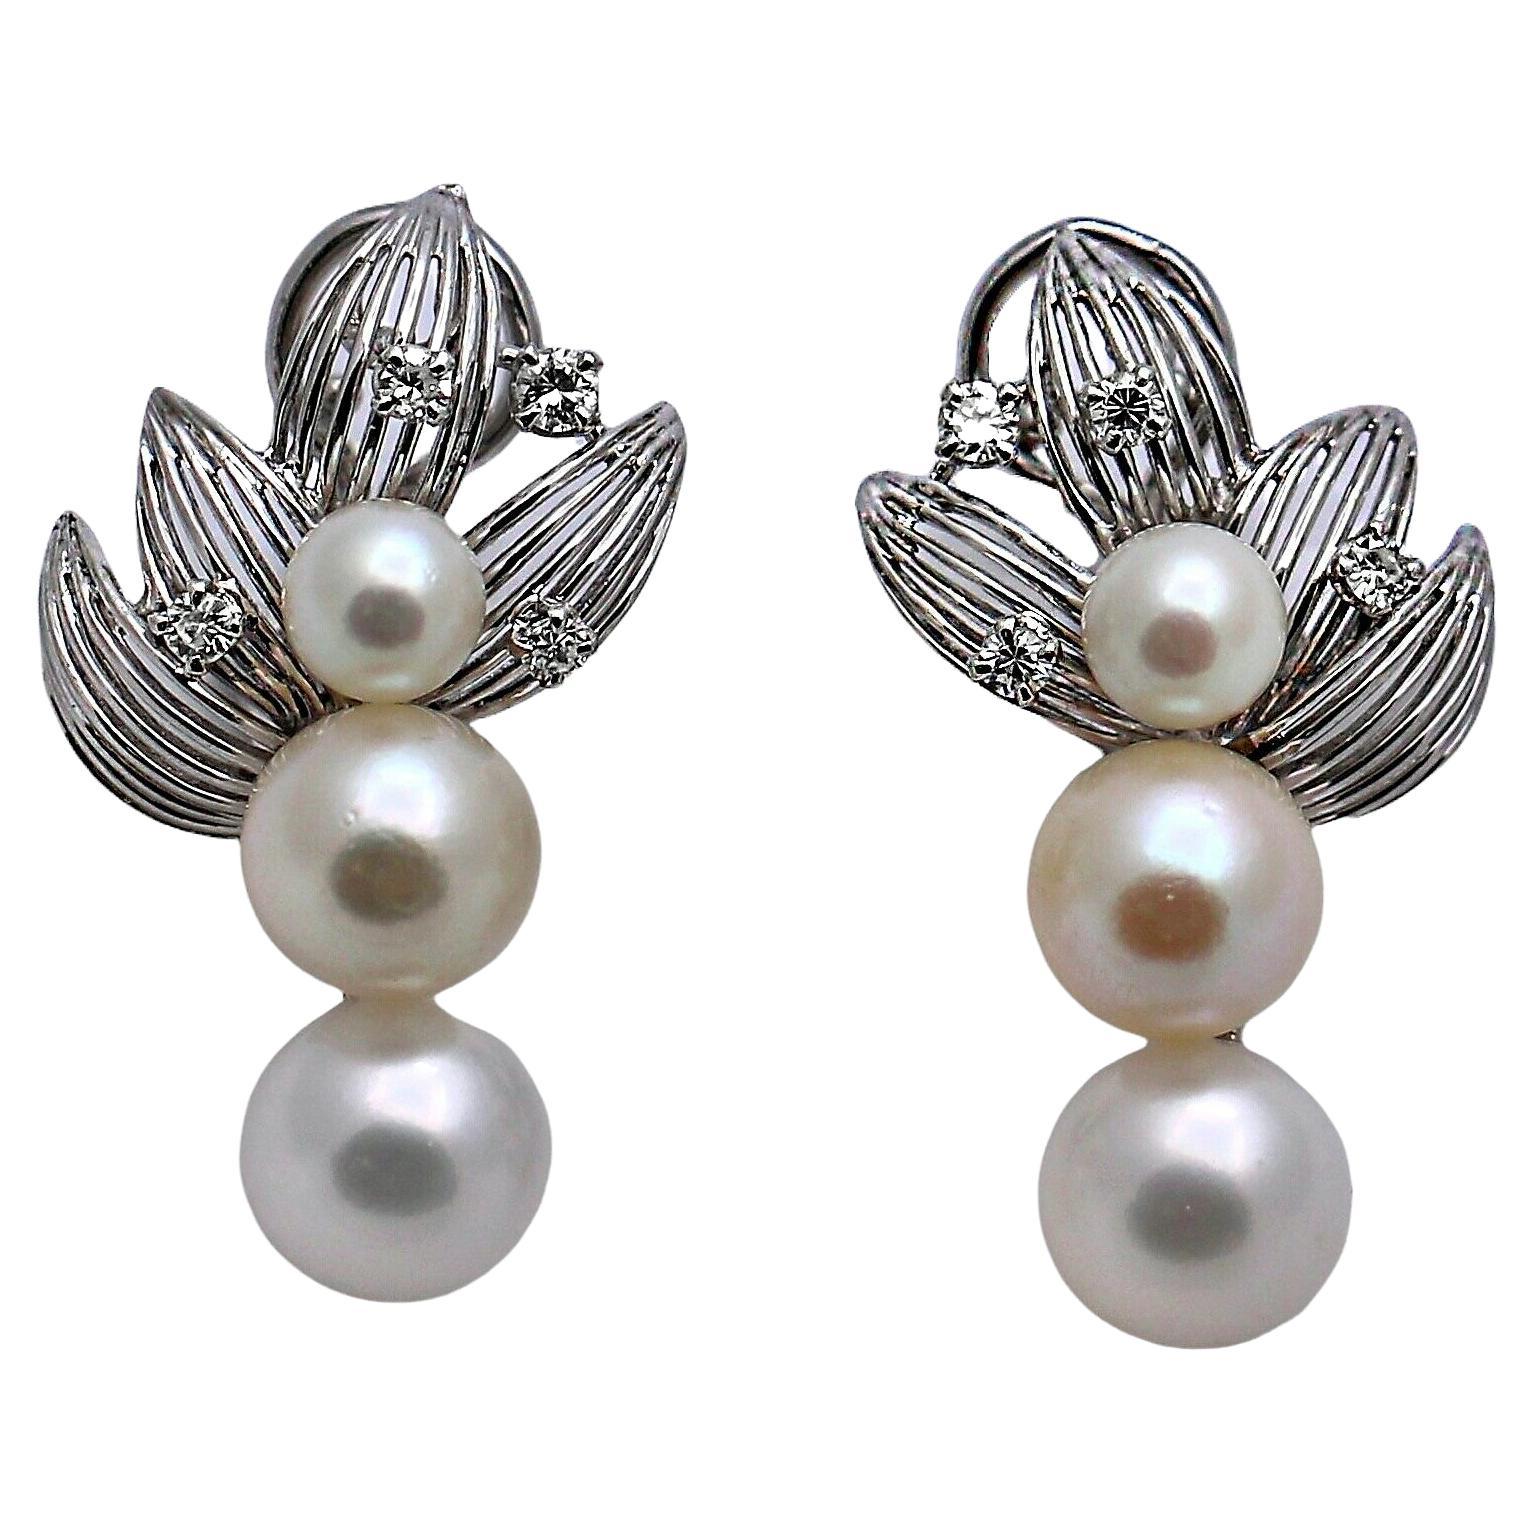 French Mid-20th Century 18K White Gold, Pearl and Diamond Earrings